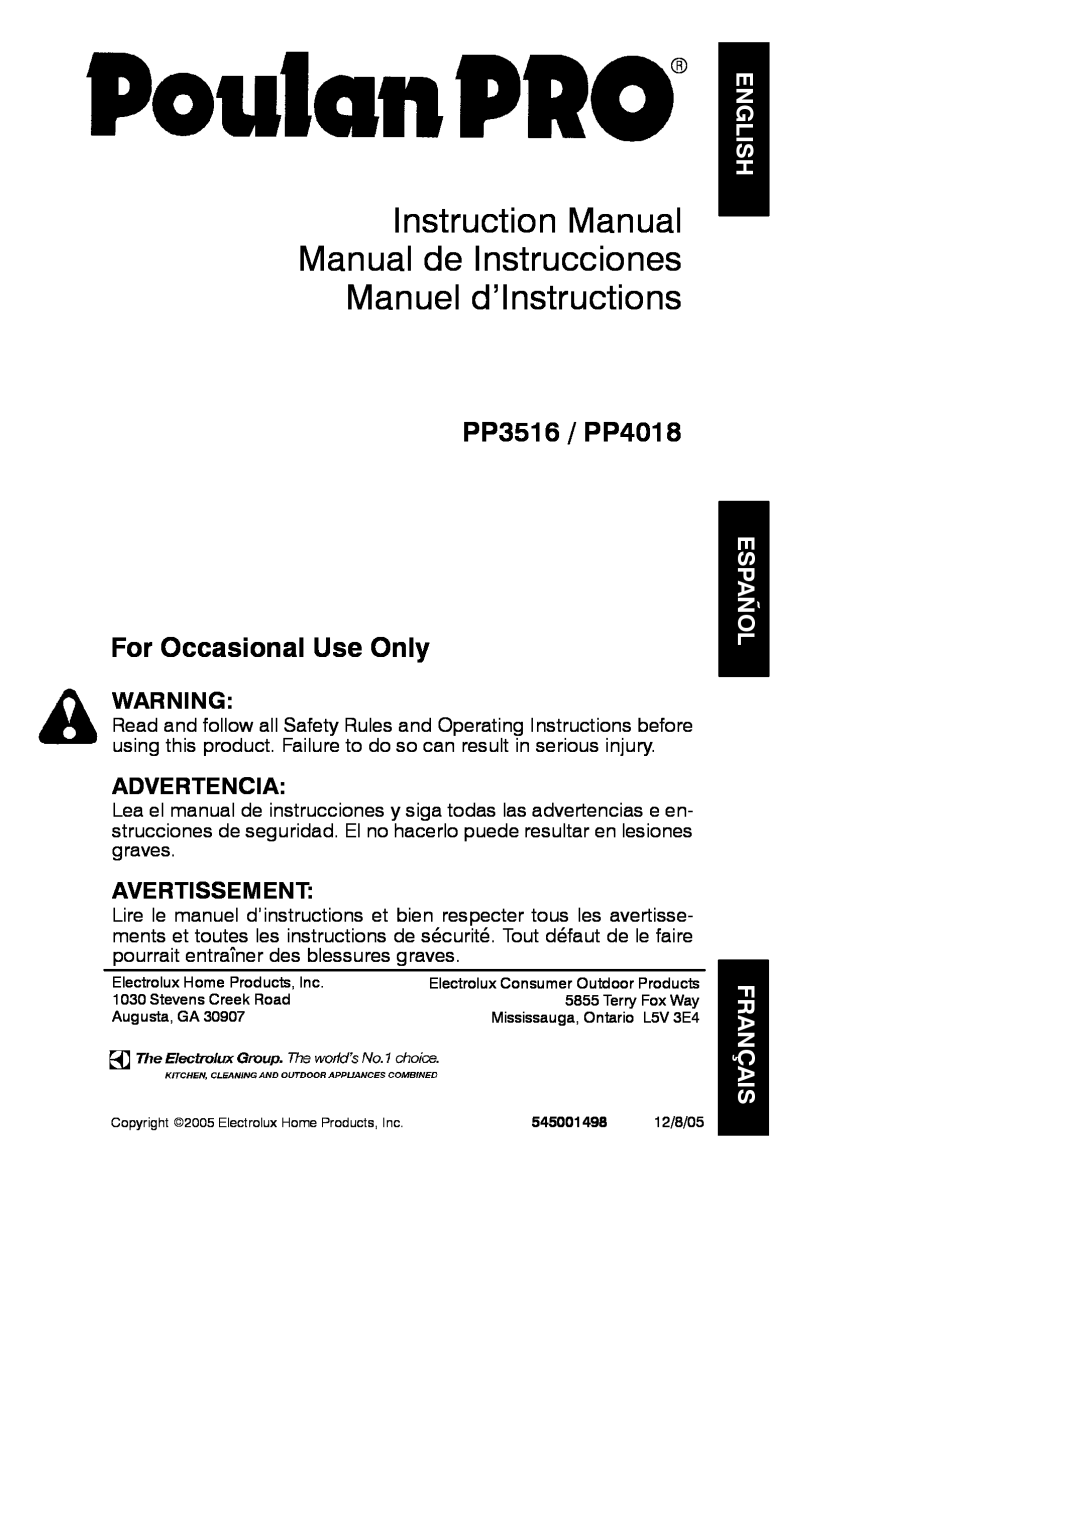 Poulan PP3516, PP4018 instruction manual English, Español Français, PP3516 / PP4018 For Occasional Use Only, Advertencia 